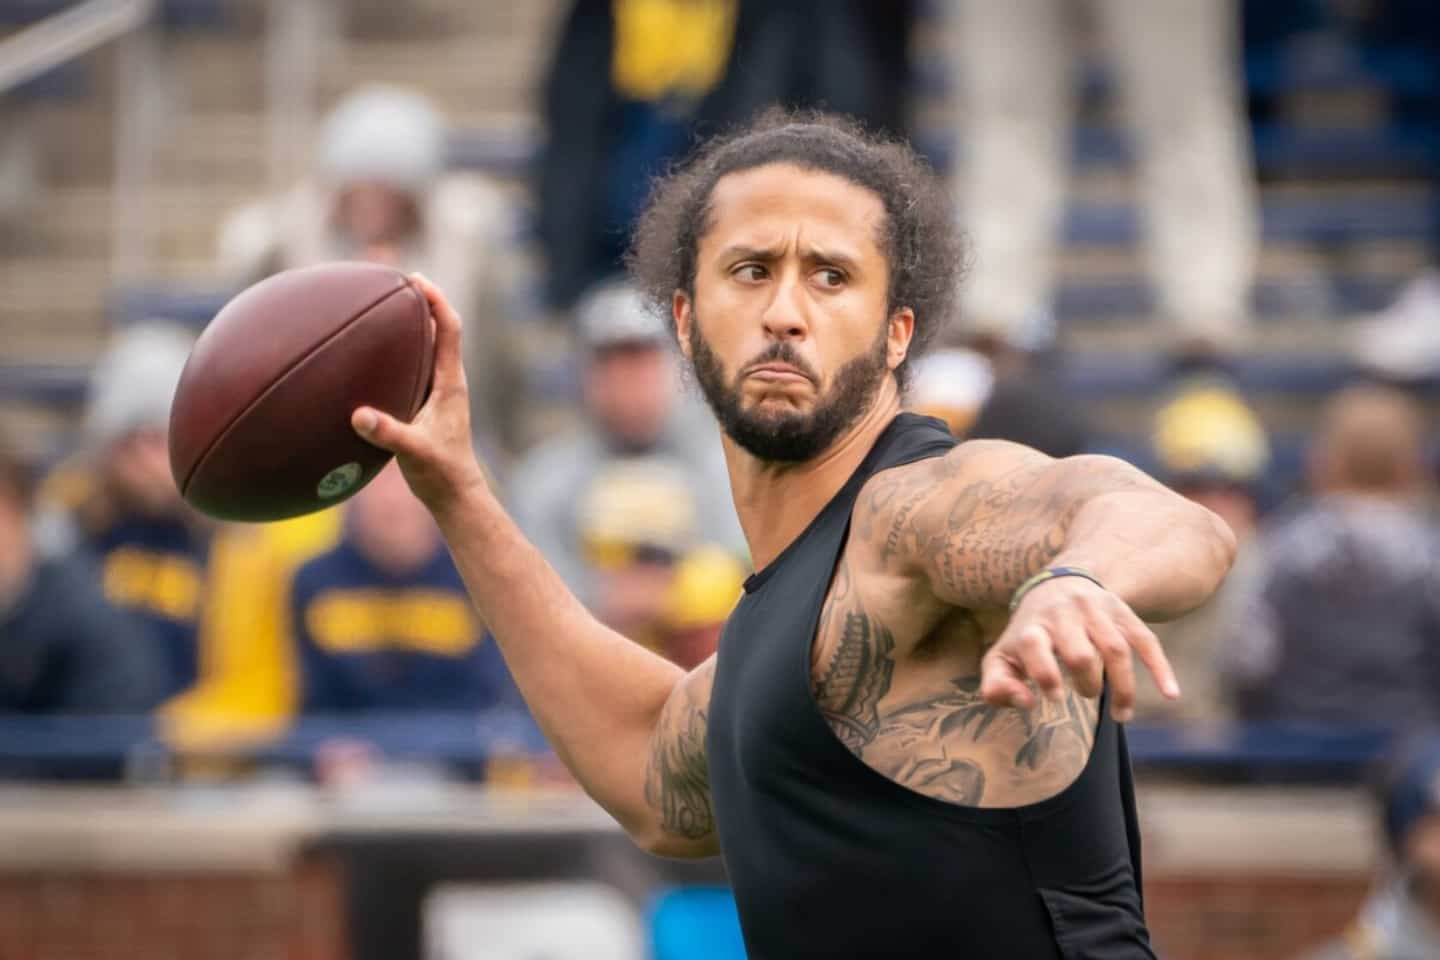 Return to the NFL: Kaepernick will have to be patient